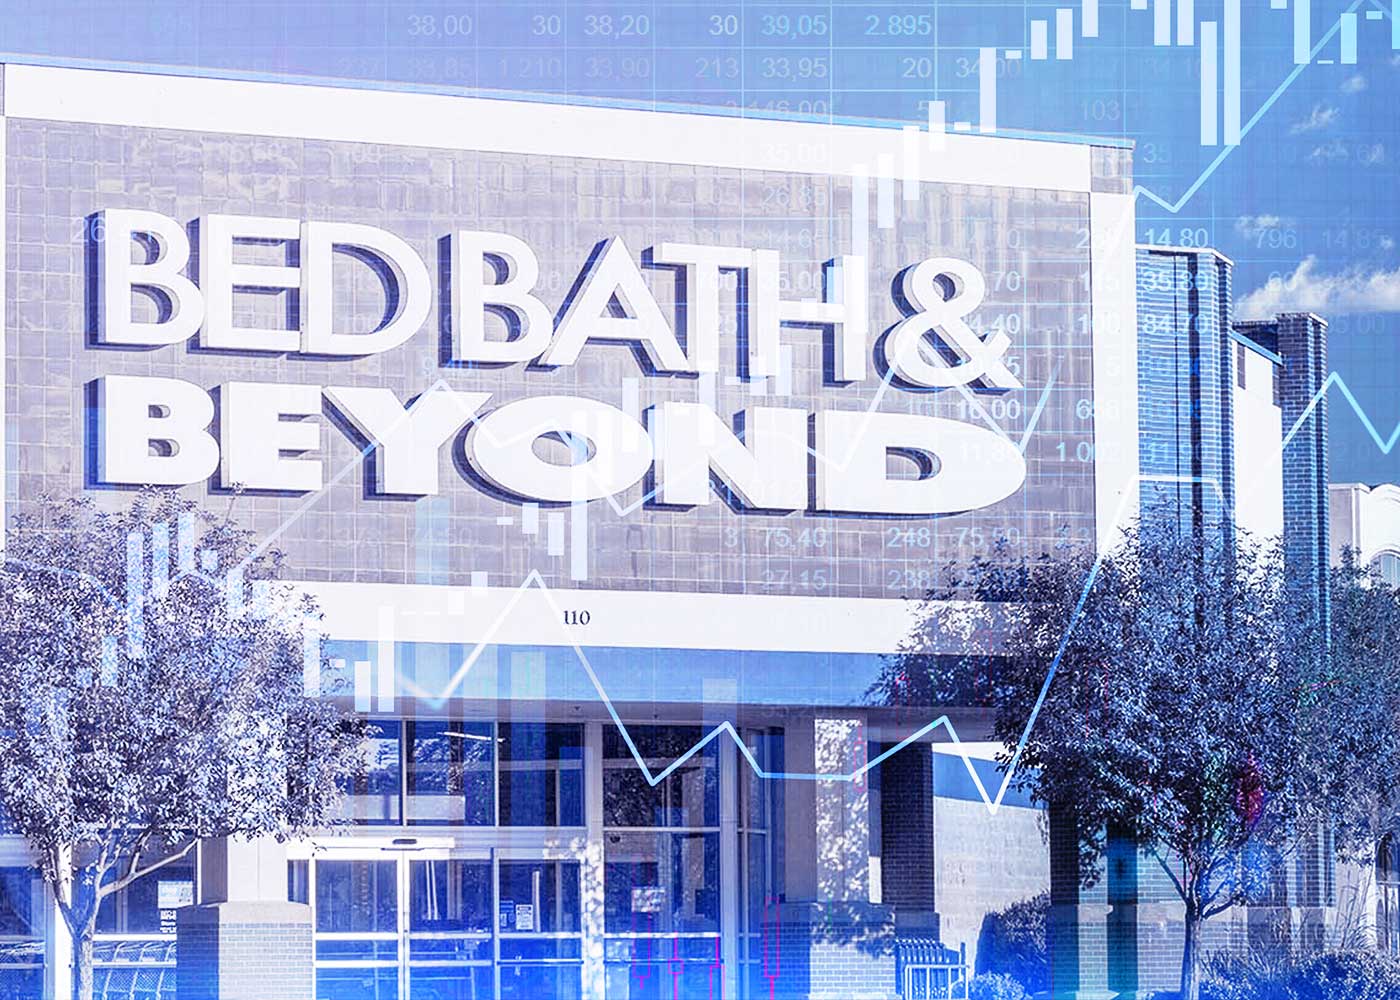 2Bed-Bath--Beyond-BBBY-Stock-Forecast--Meme-Stock-Phenomenon-and-an-Analysis-